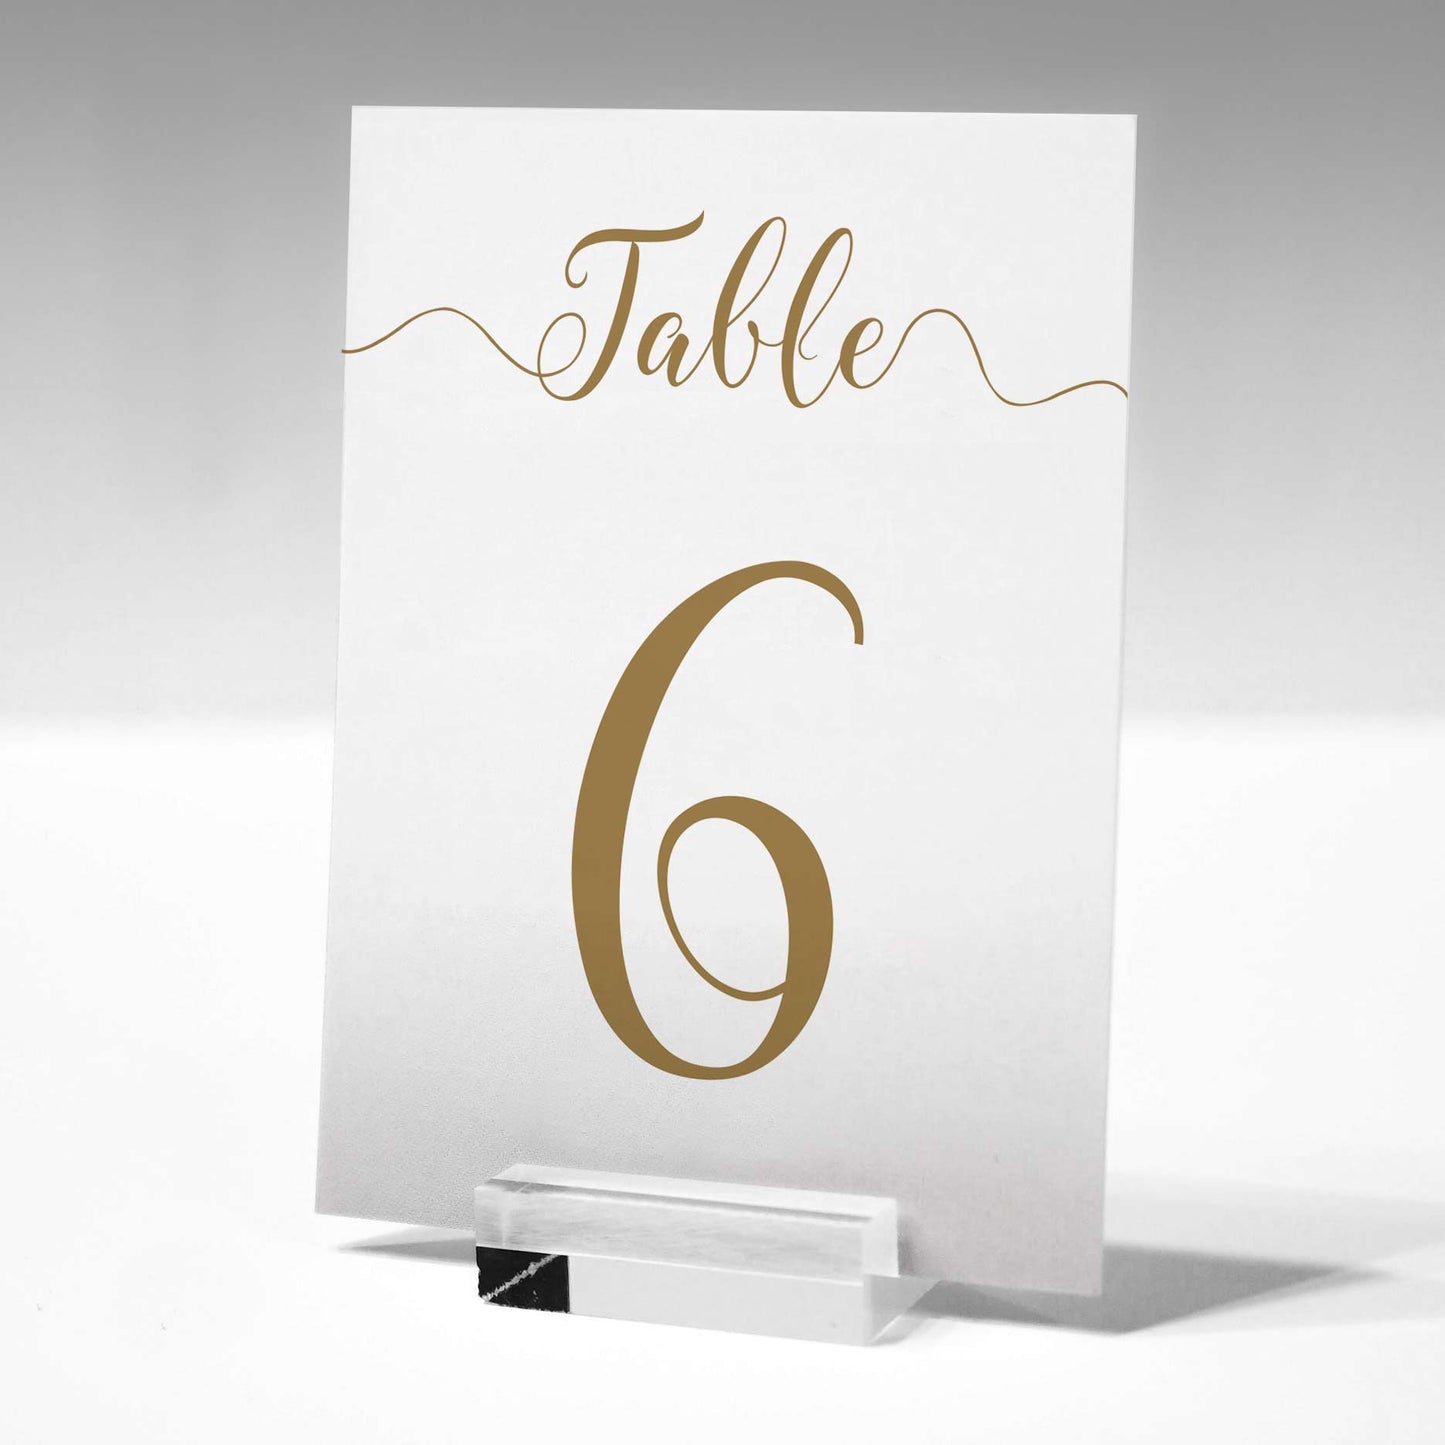 5"x7" gold table number printed on card in a glass stand